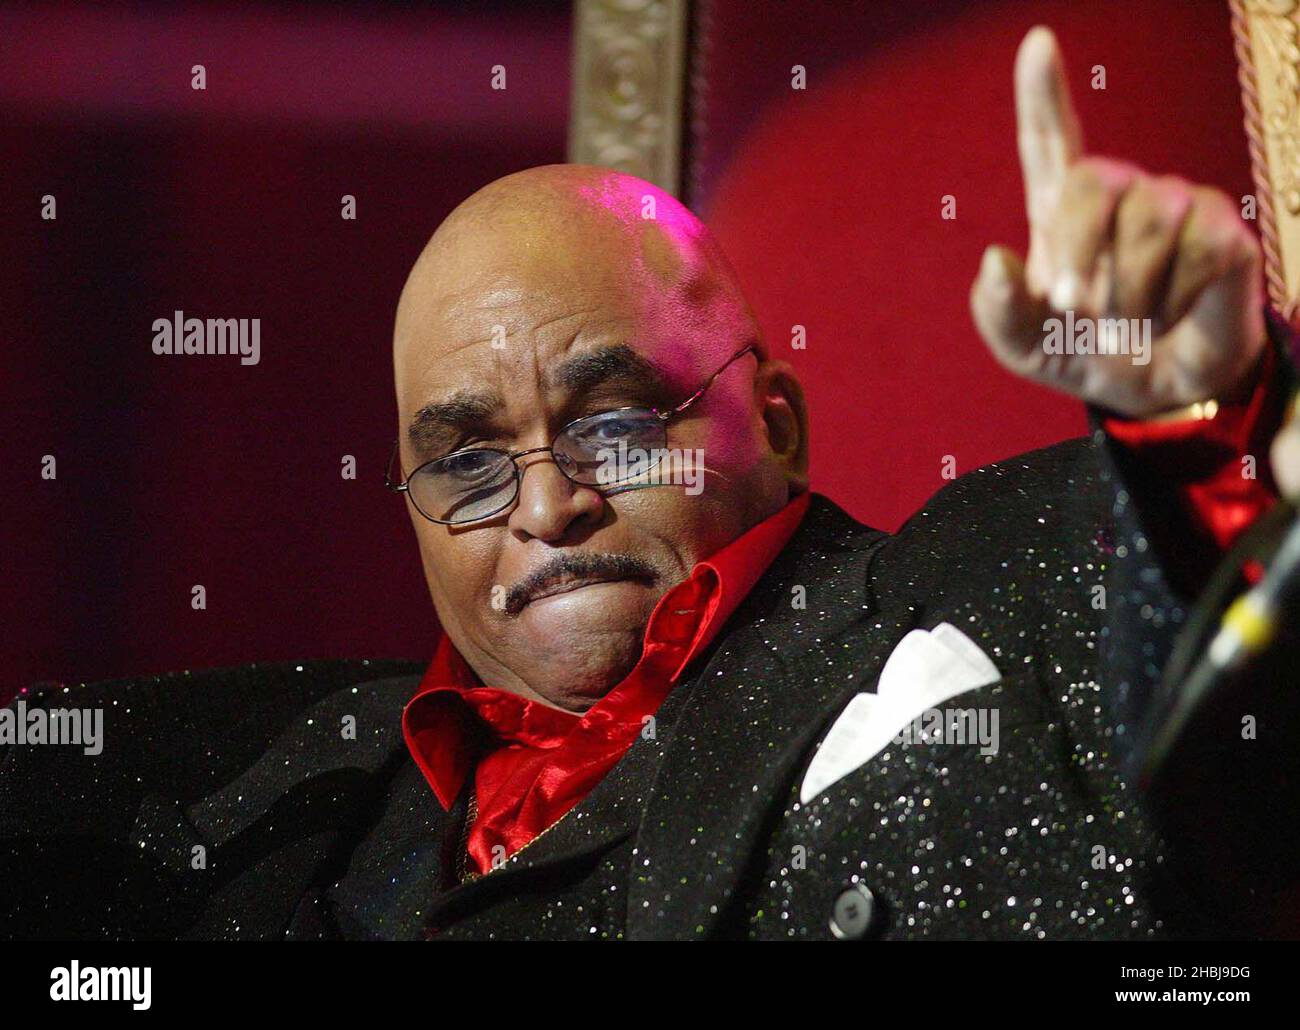 Solomon Burke with Zucchero performs on stage at benefit show in aid of the  United Nations' UNHCR refugees fund, at The Royal Albert Hall on May 6,  2004 in London. Show celebrates